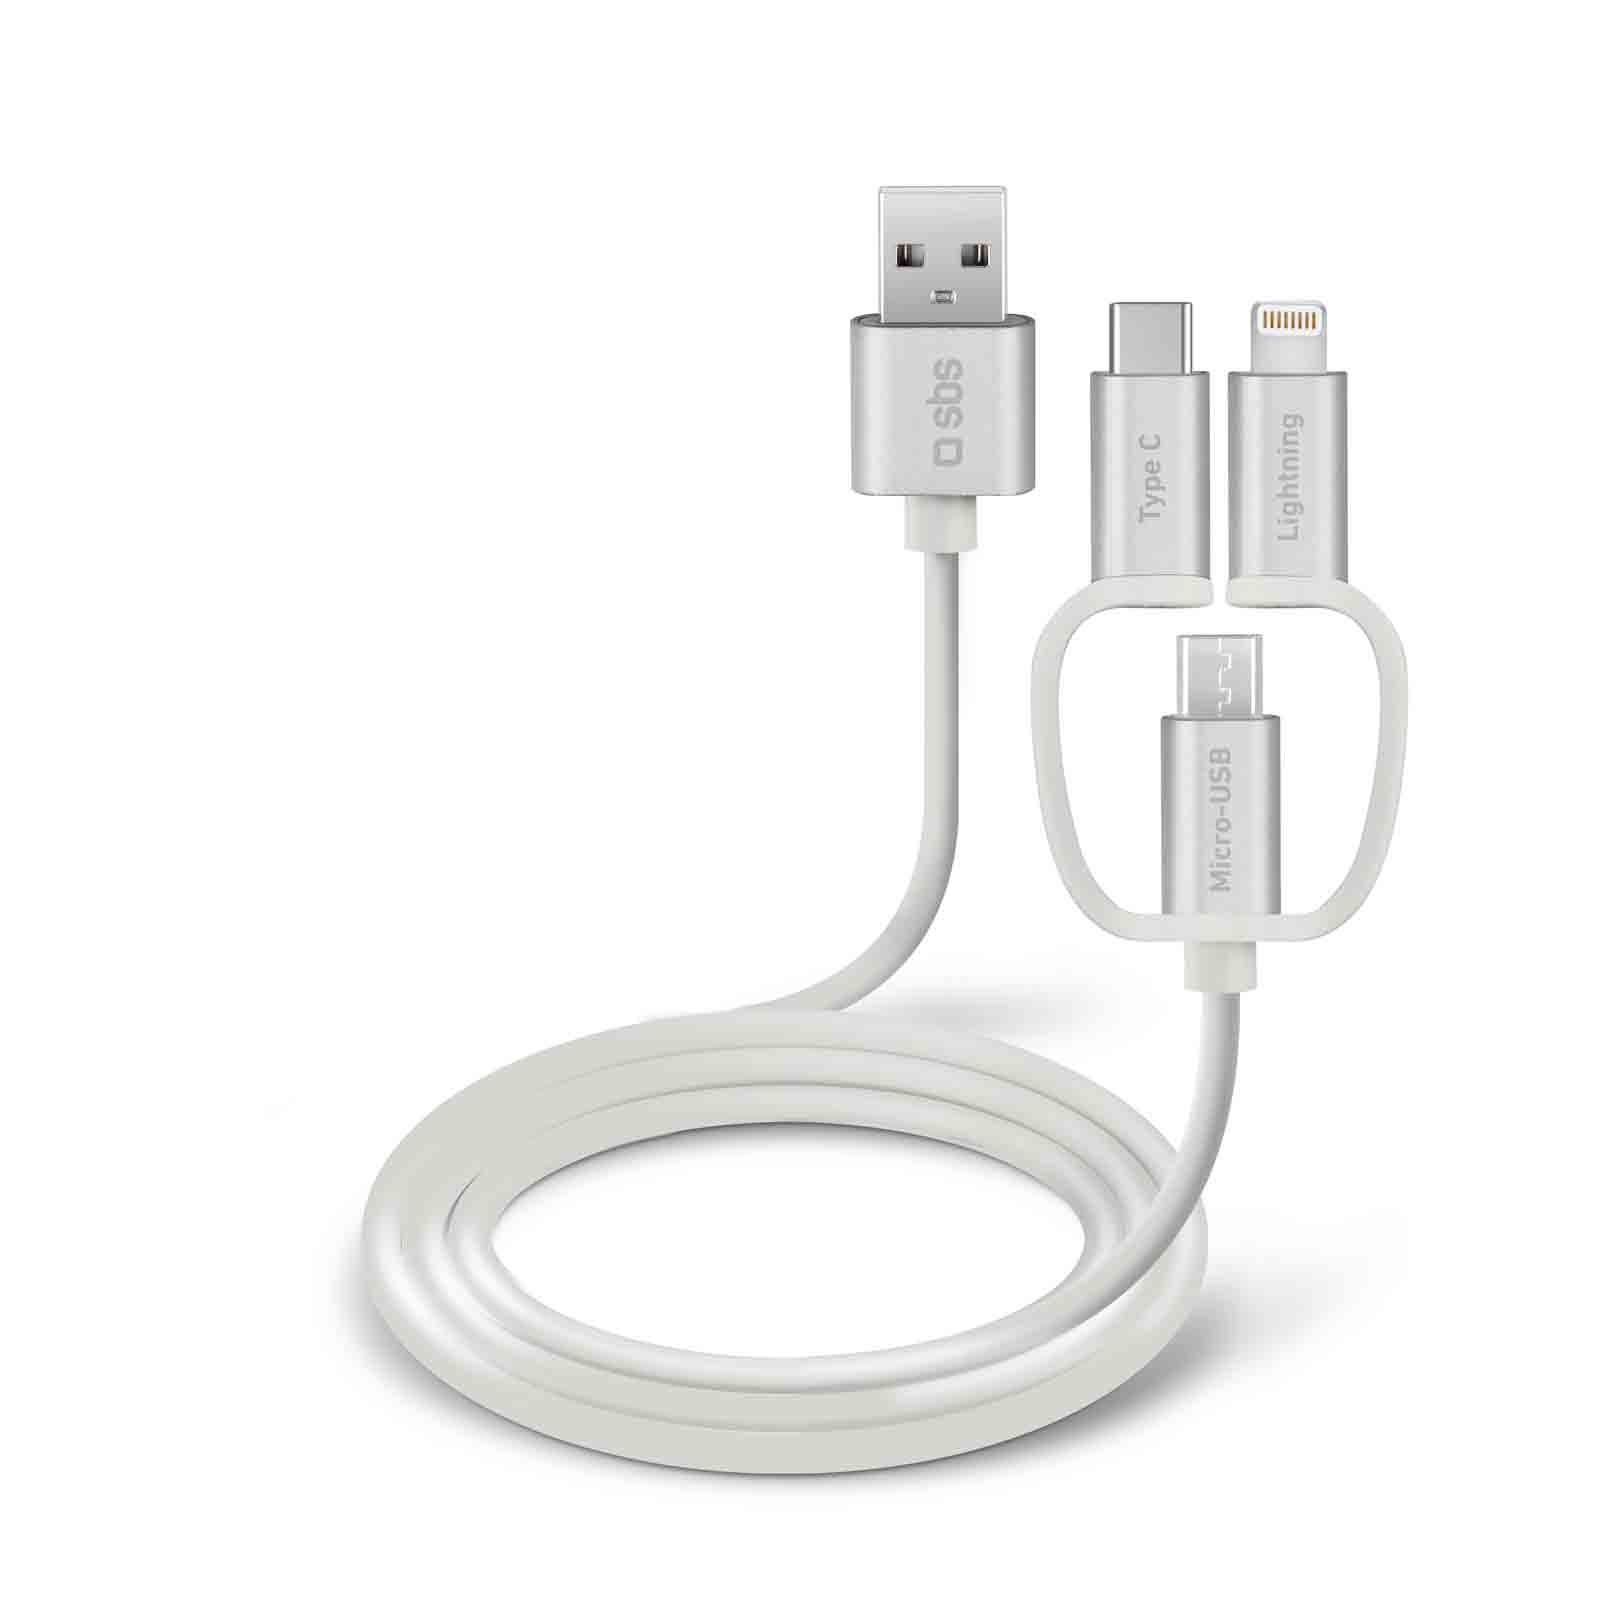 SBS Data cable USB 2.0 to Apple Lightning, lenght 2 m, white color